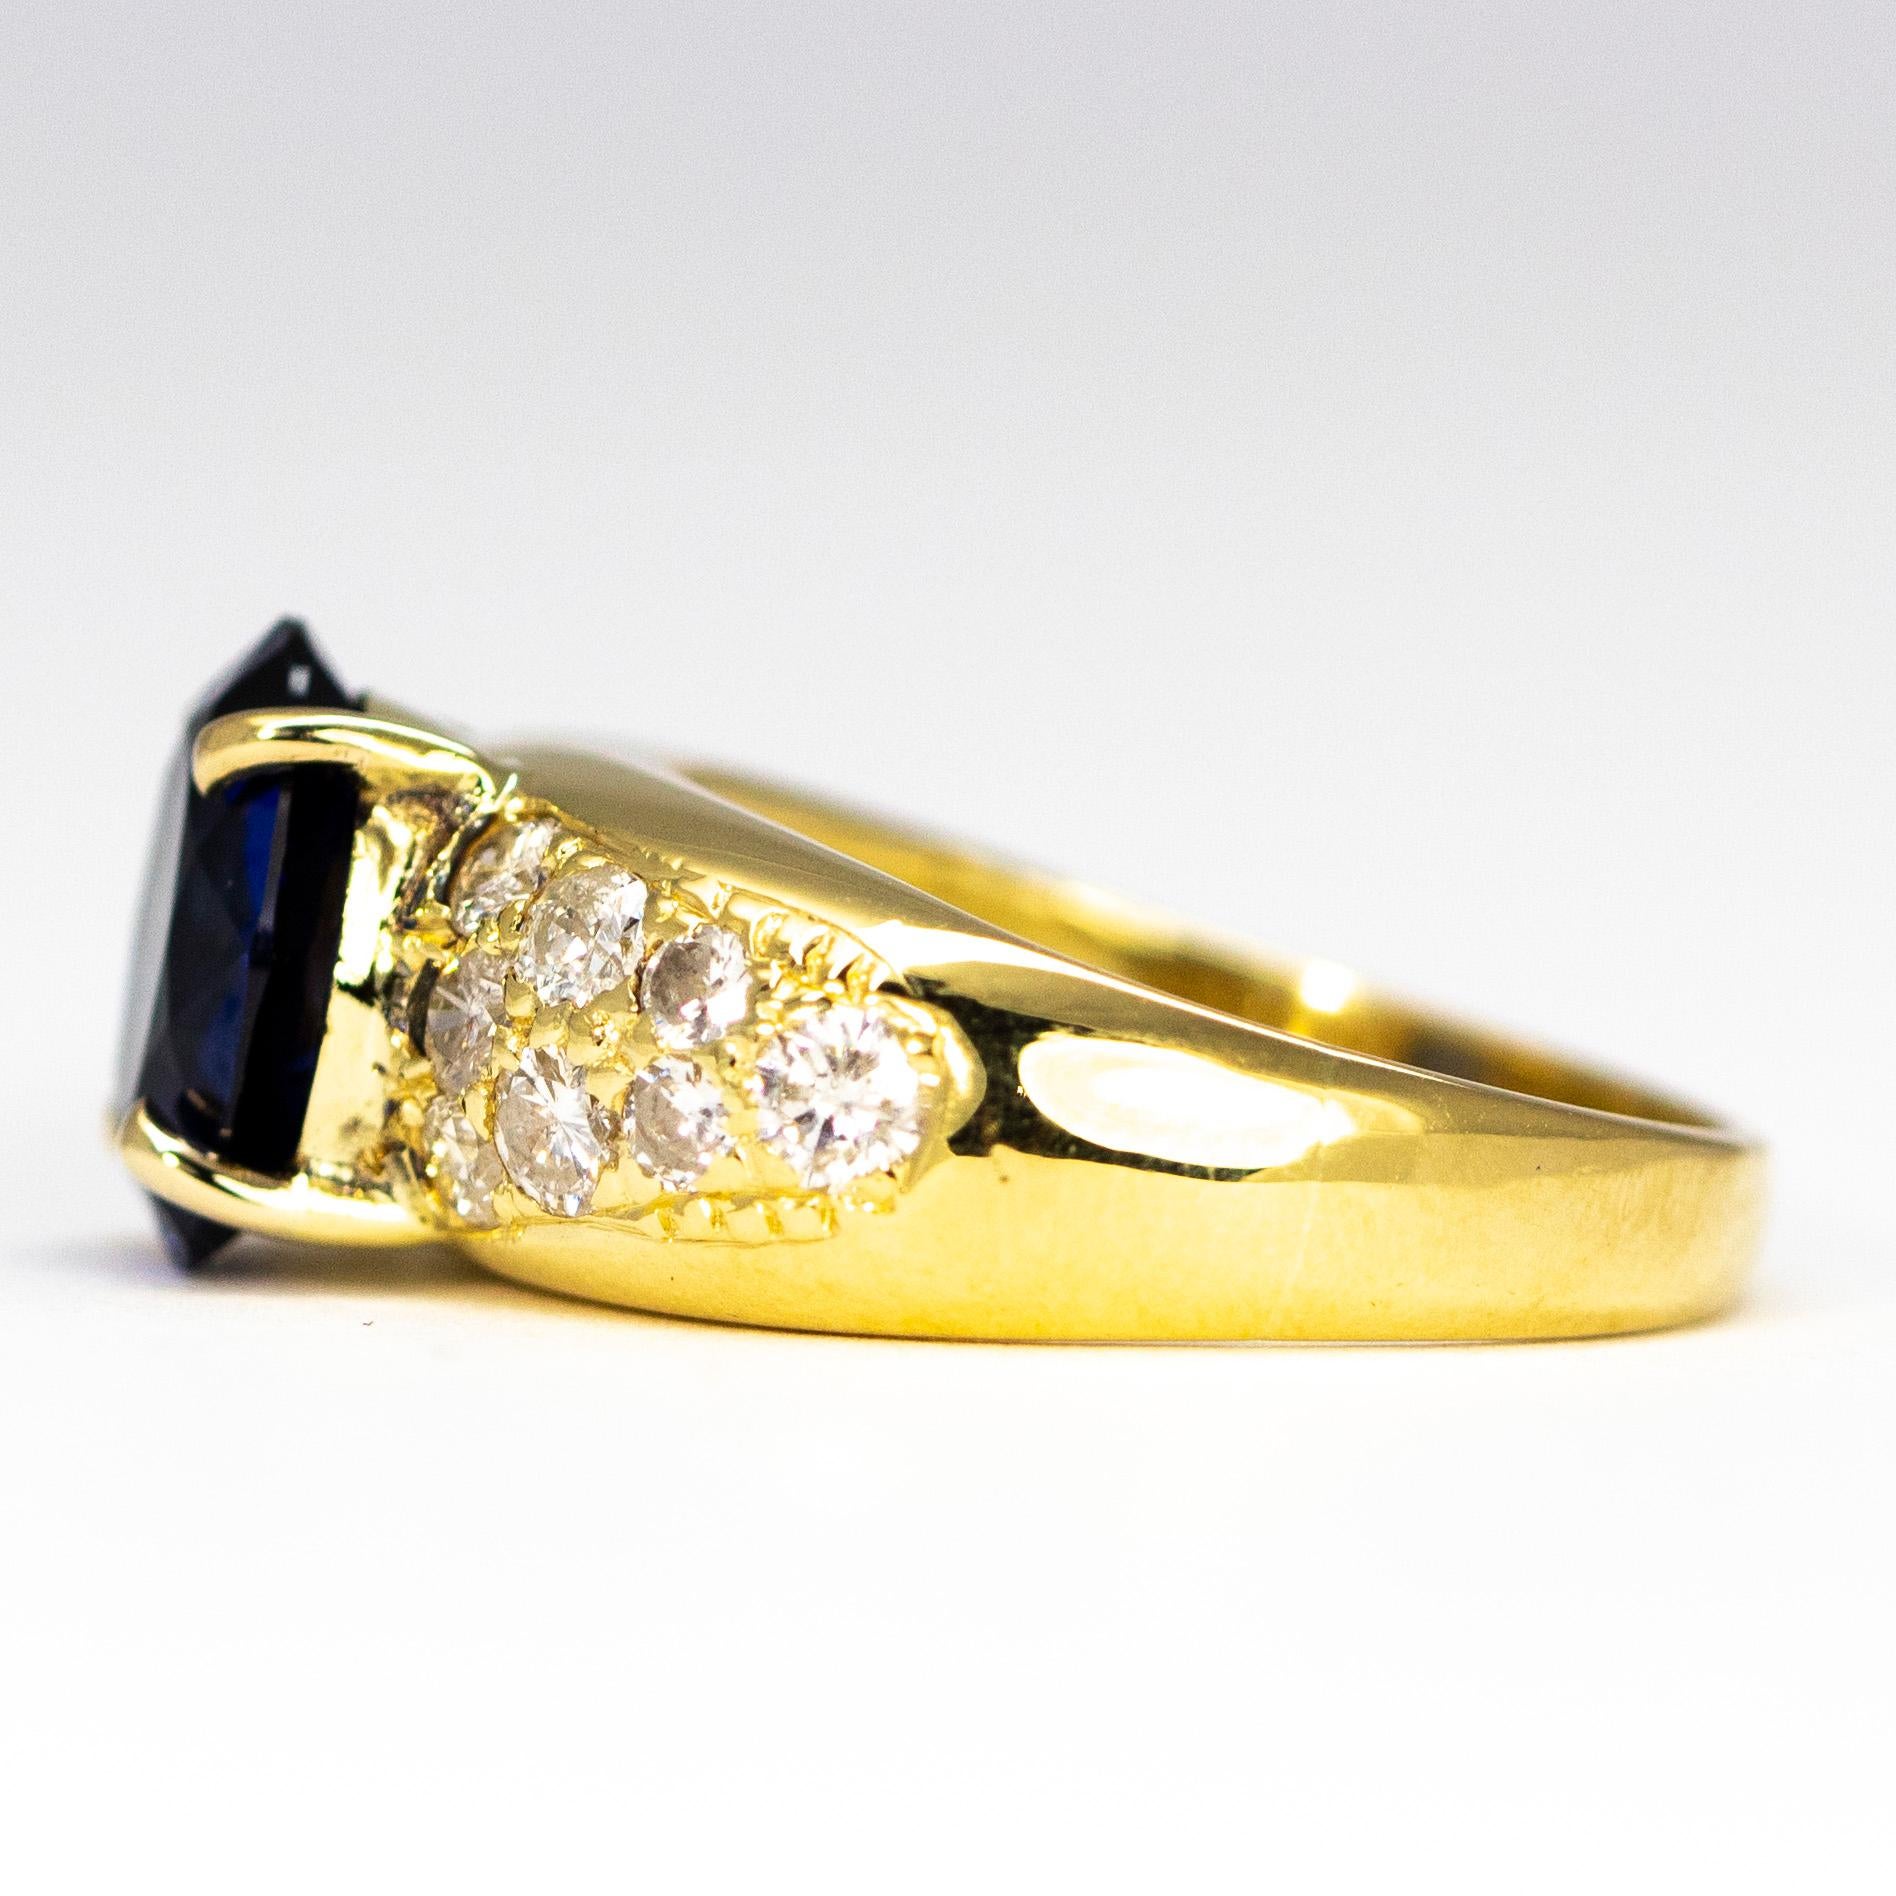 18 carat gold ring with sapphire